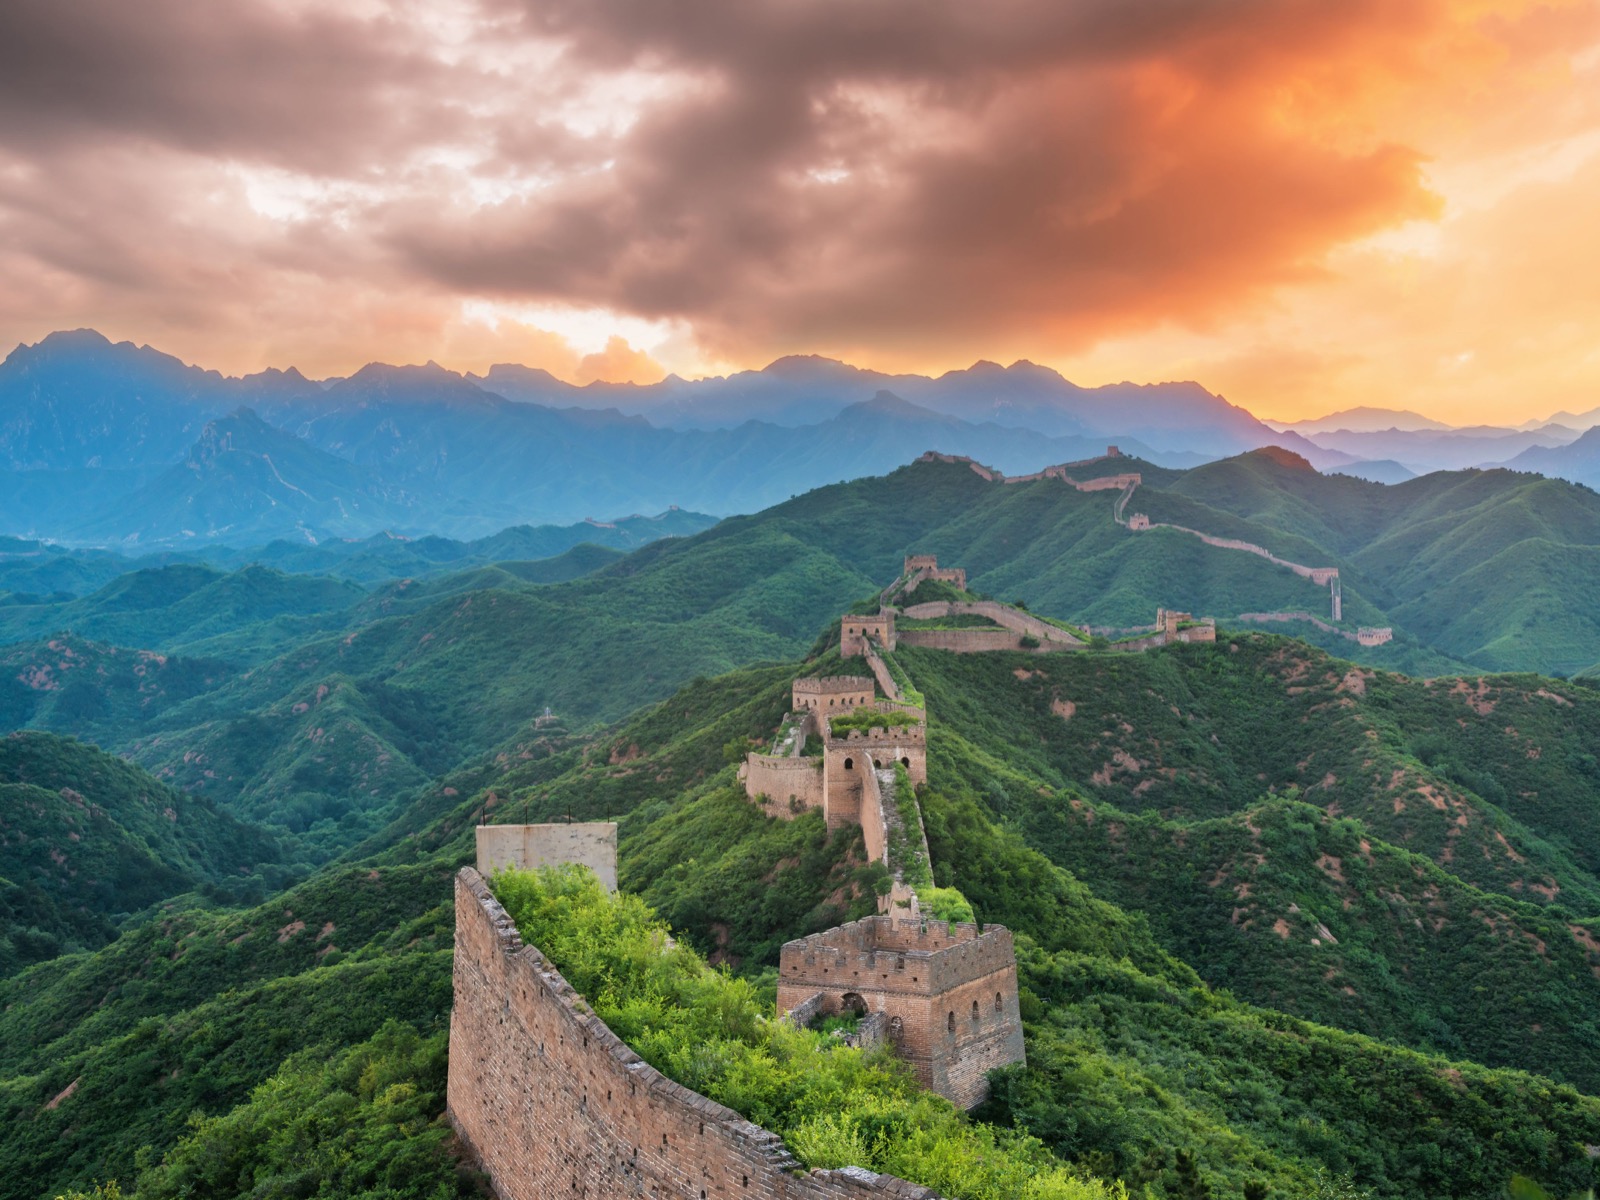 Splurge Your Entire Savings ✈️ Traveling the World to Find Out How Many Years You Have Left Great Wall Of China